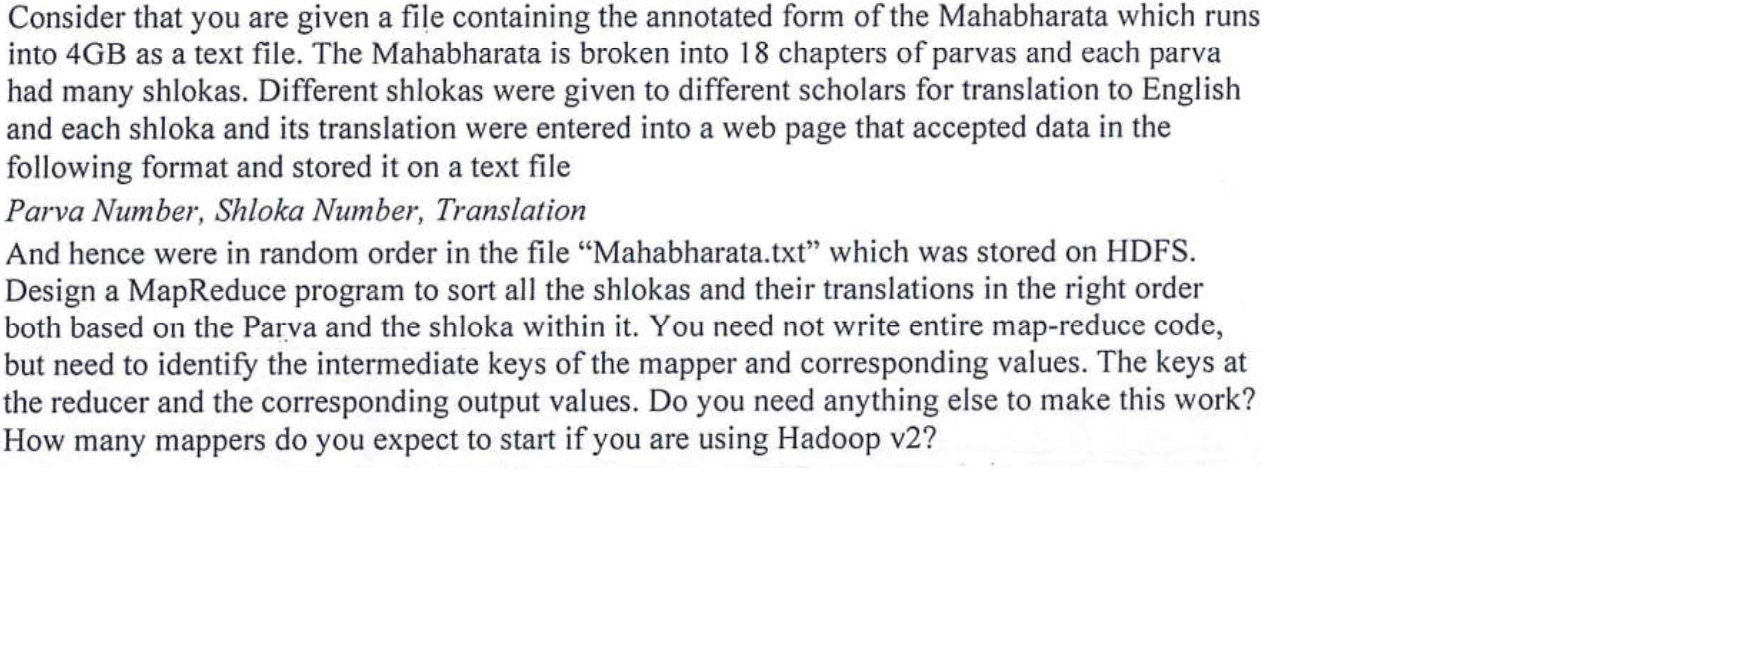 Consider that you are given a file containing the annotated form of the Mahabharata which runs into 4GB as a